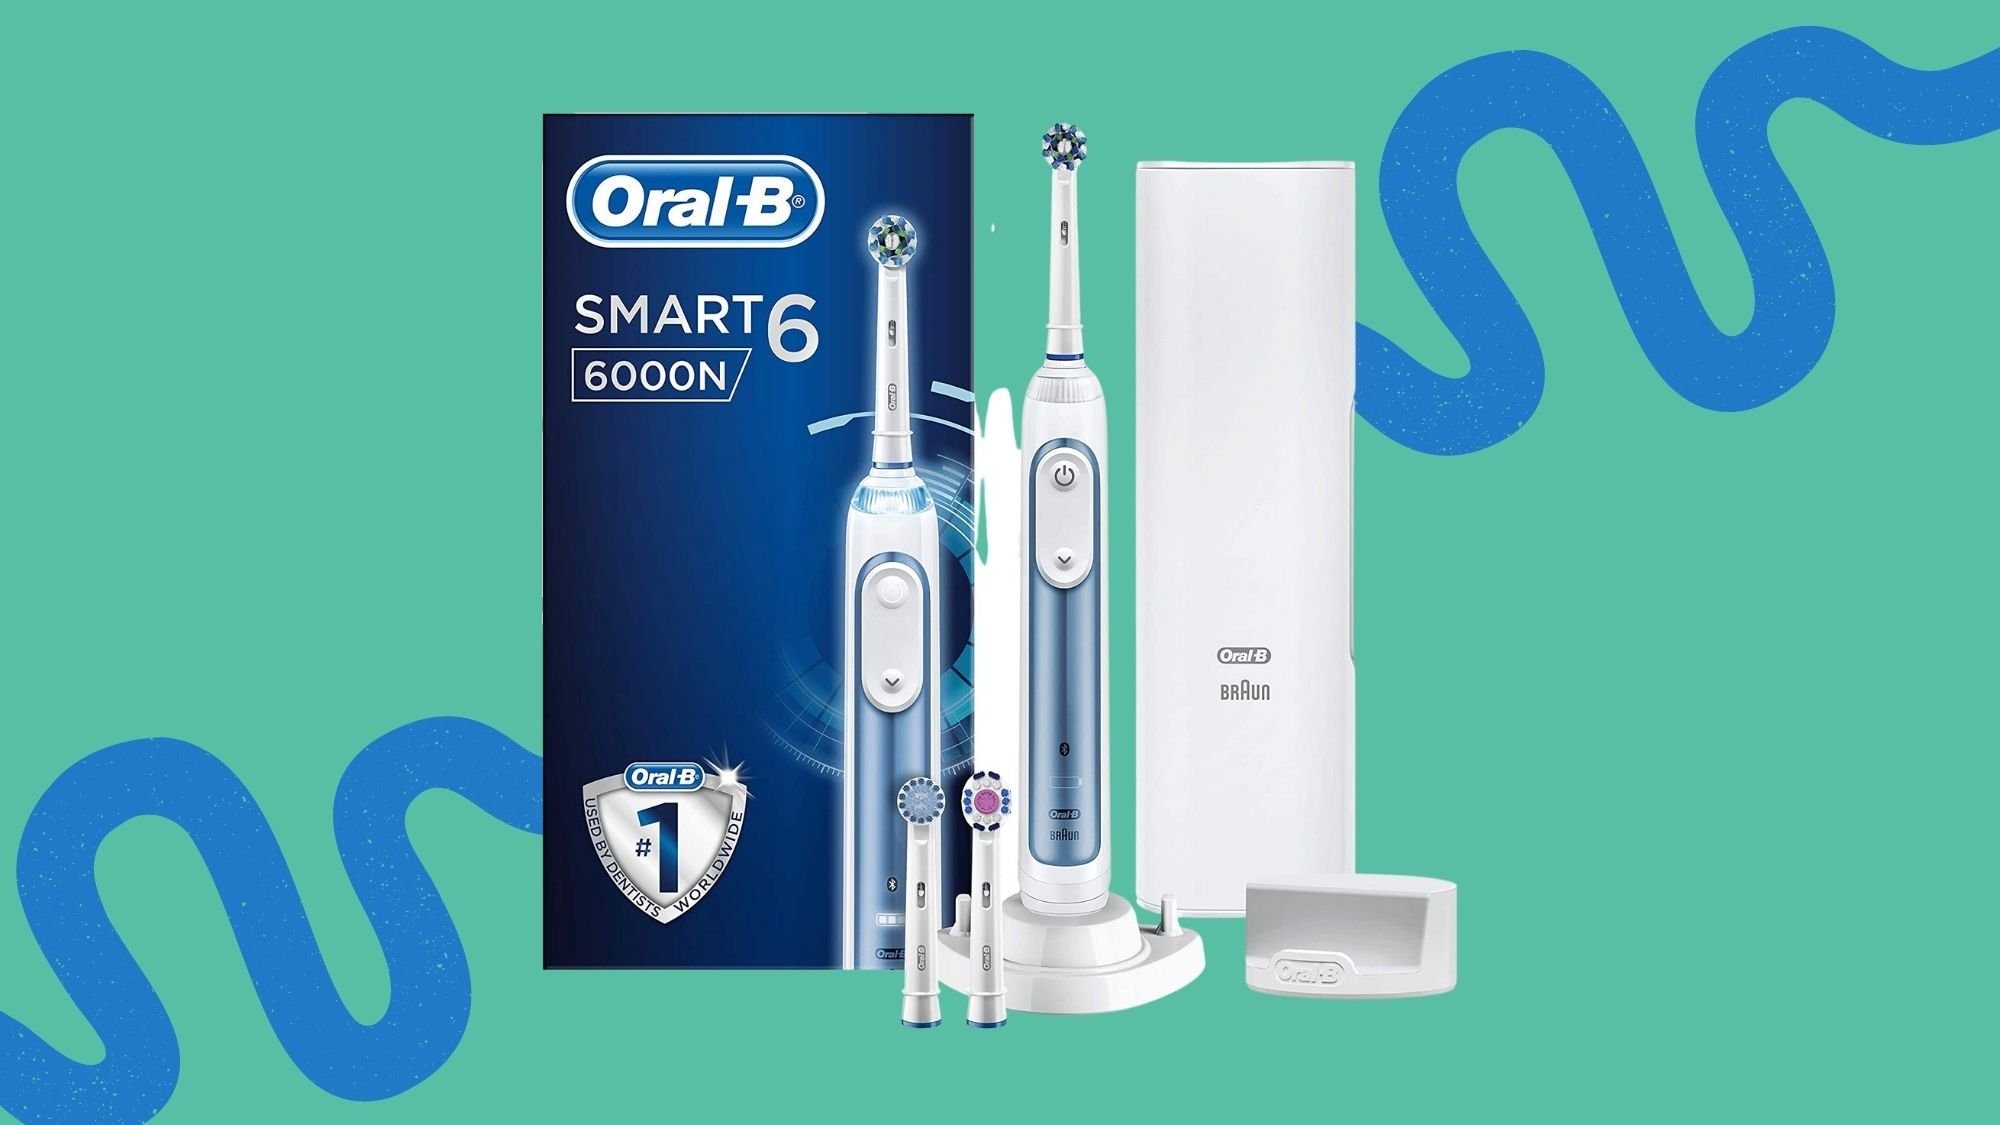 Black Friday electric toothbrush deals: Get 73% off Oral B brushes now